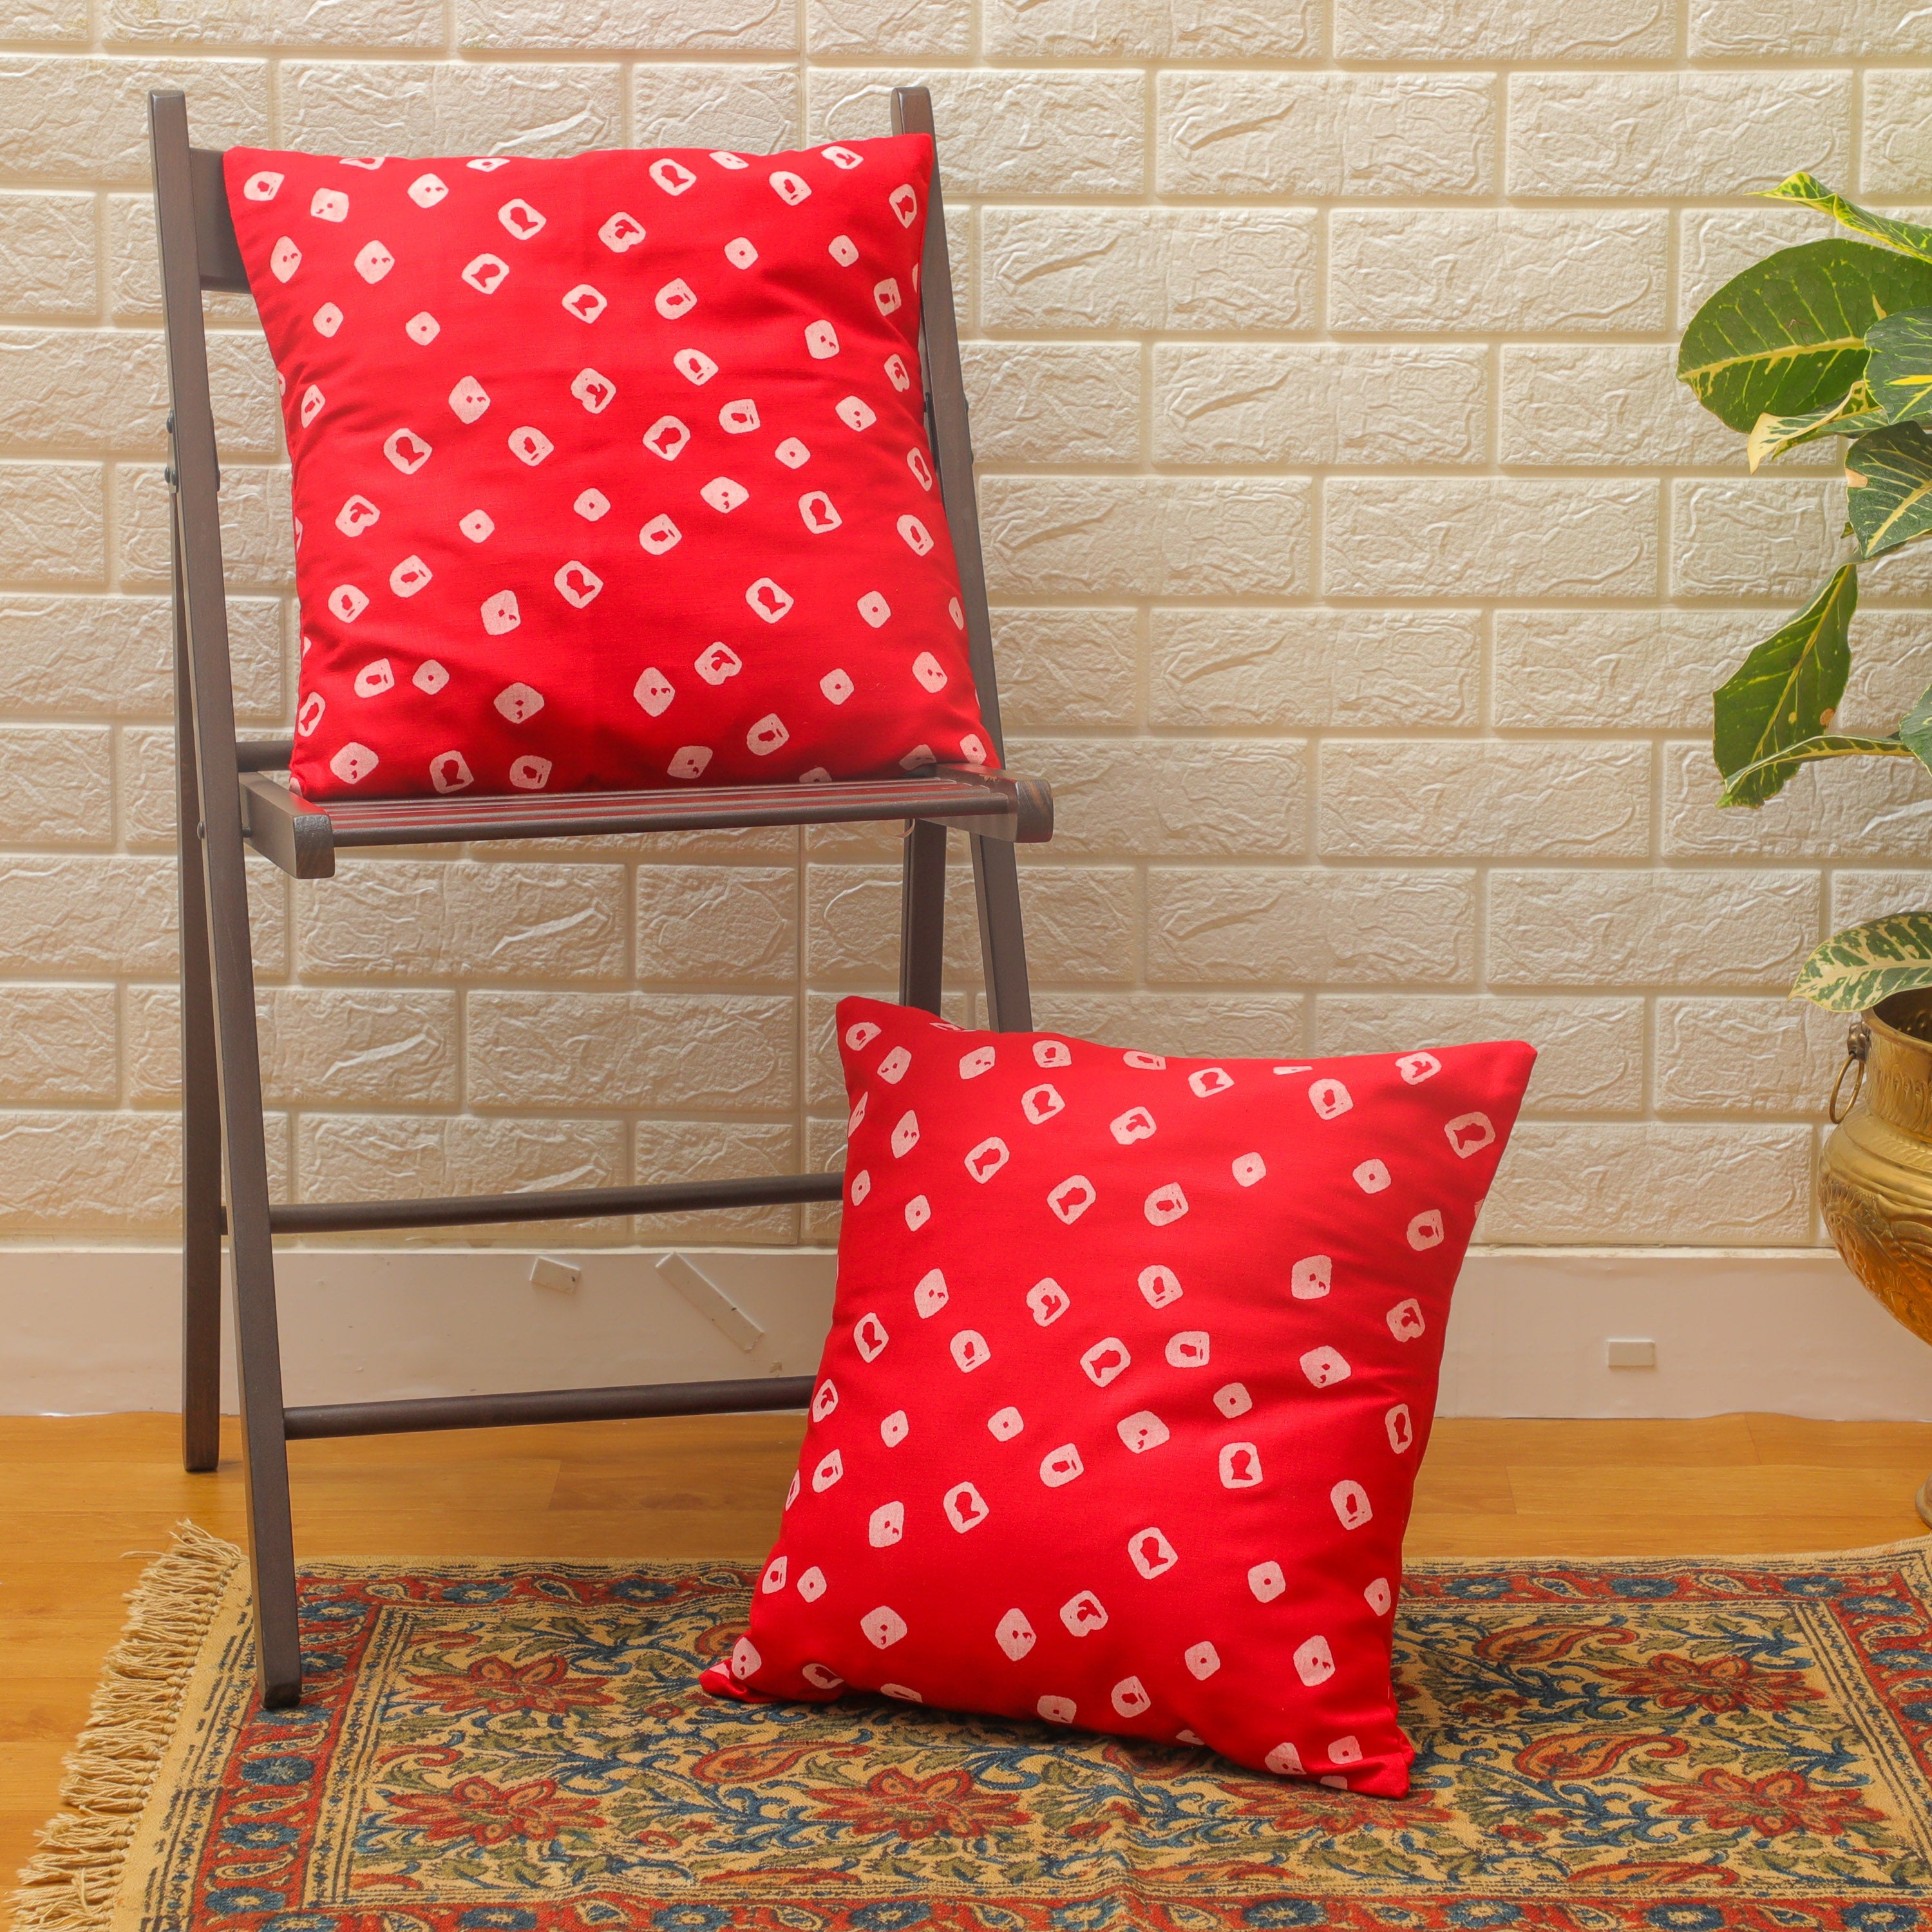 Made from soft cotton, this red cushion adds a pop of color and texture to any space.